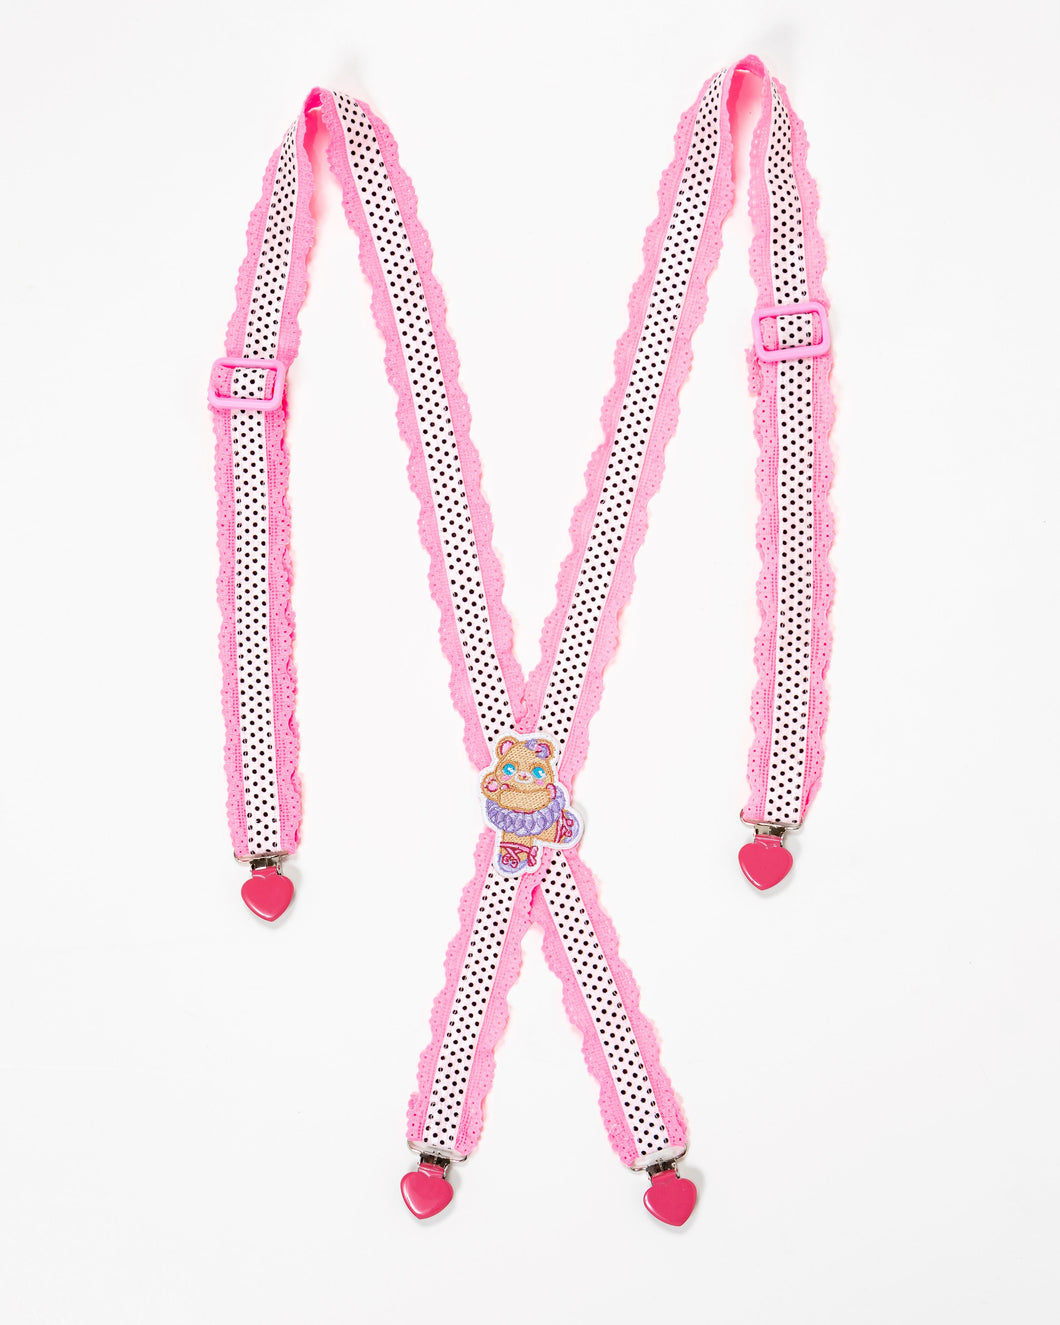 Hot pink/polka dot suspenders - Lovely Dreamhouse - Made to order